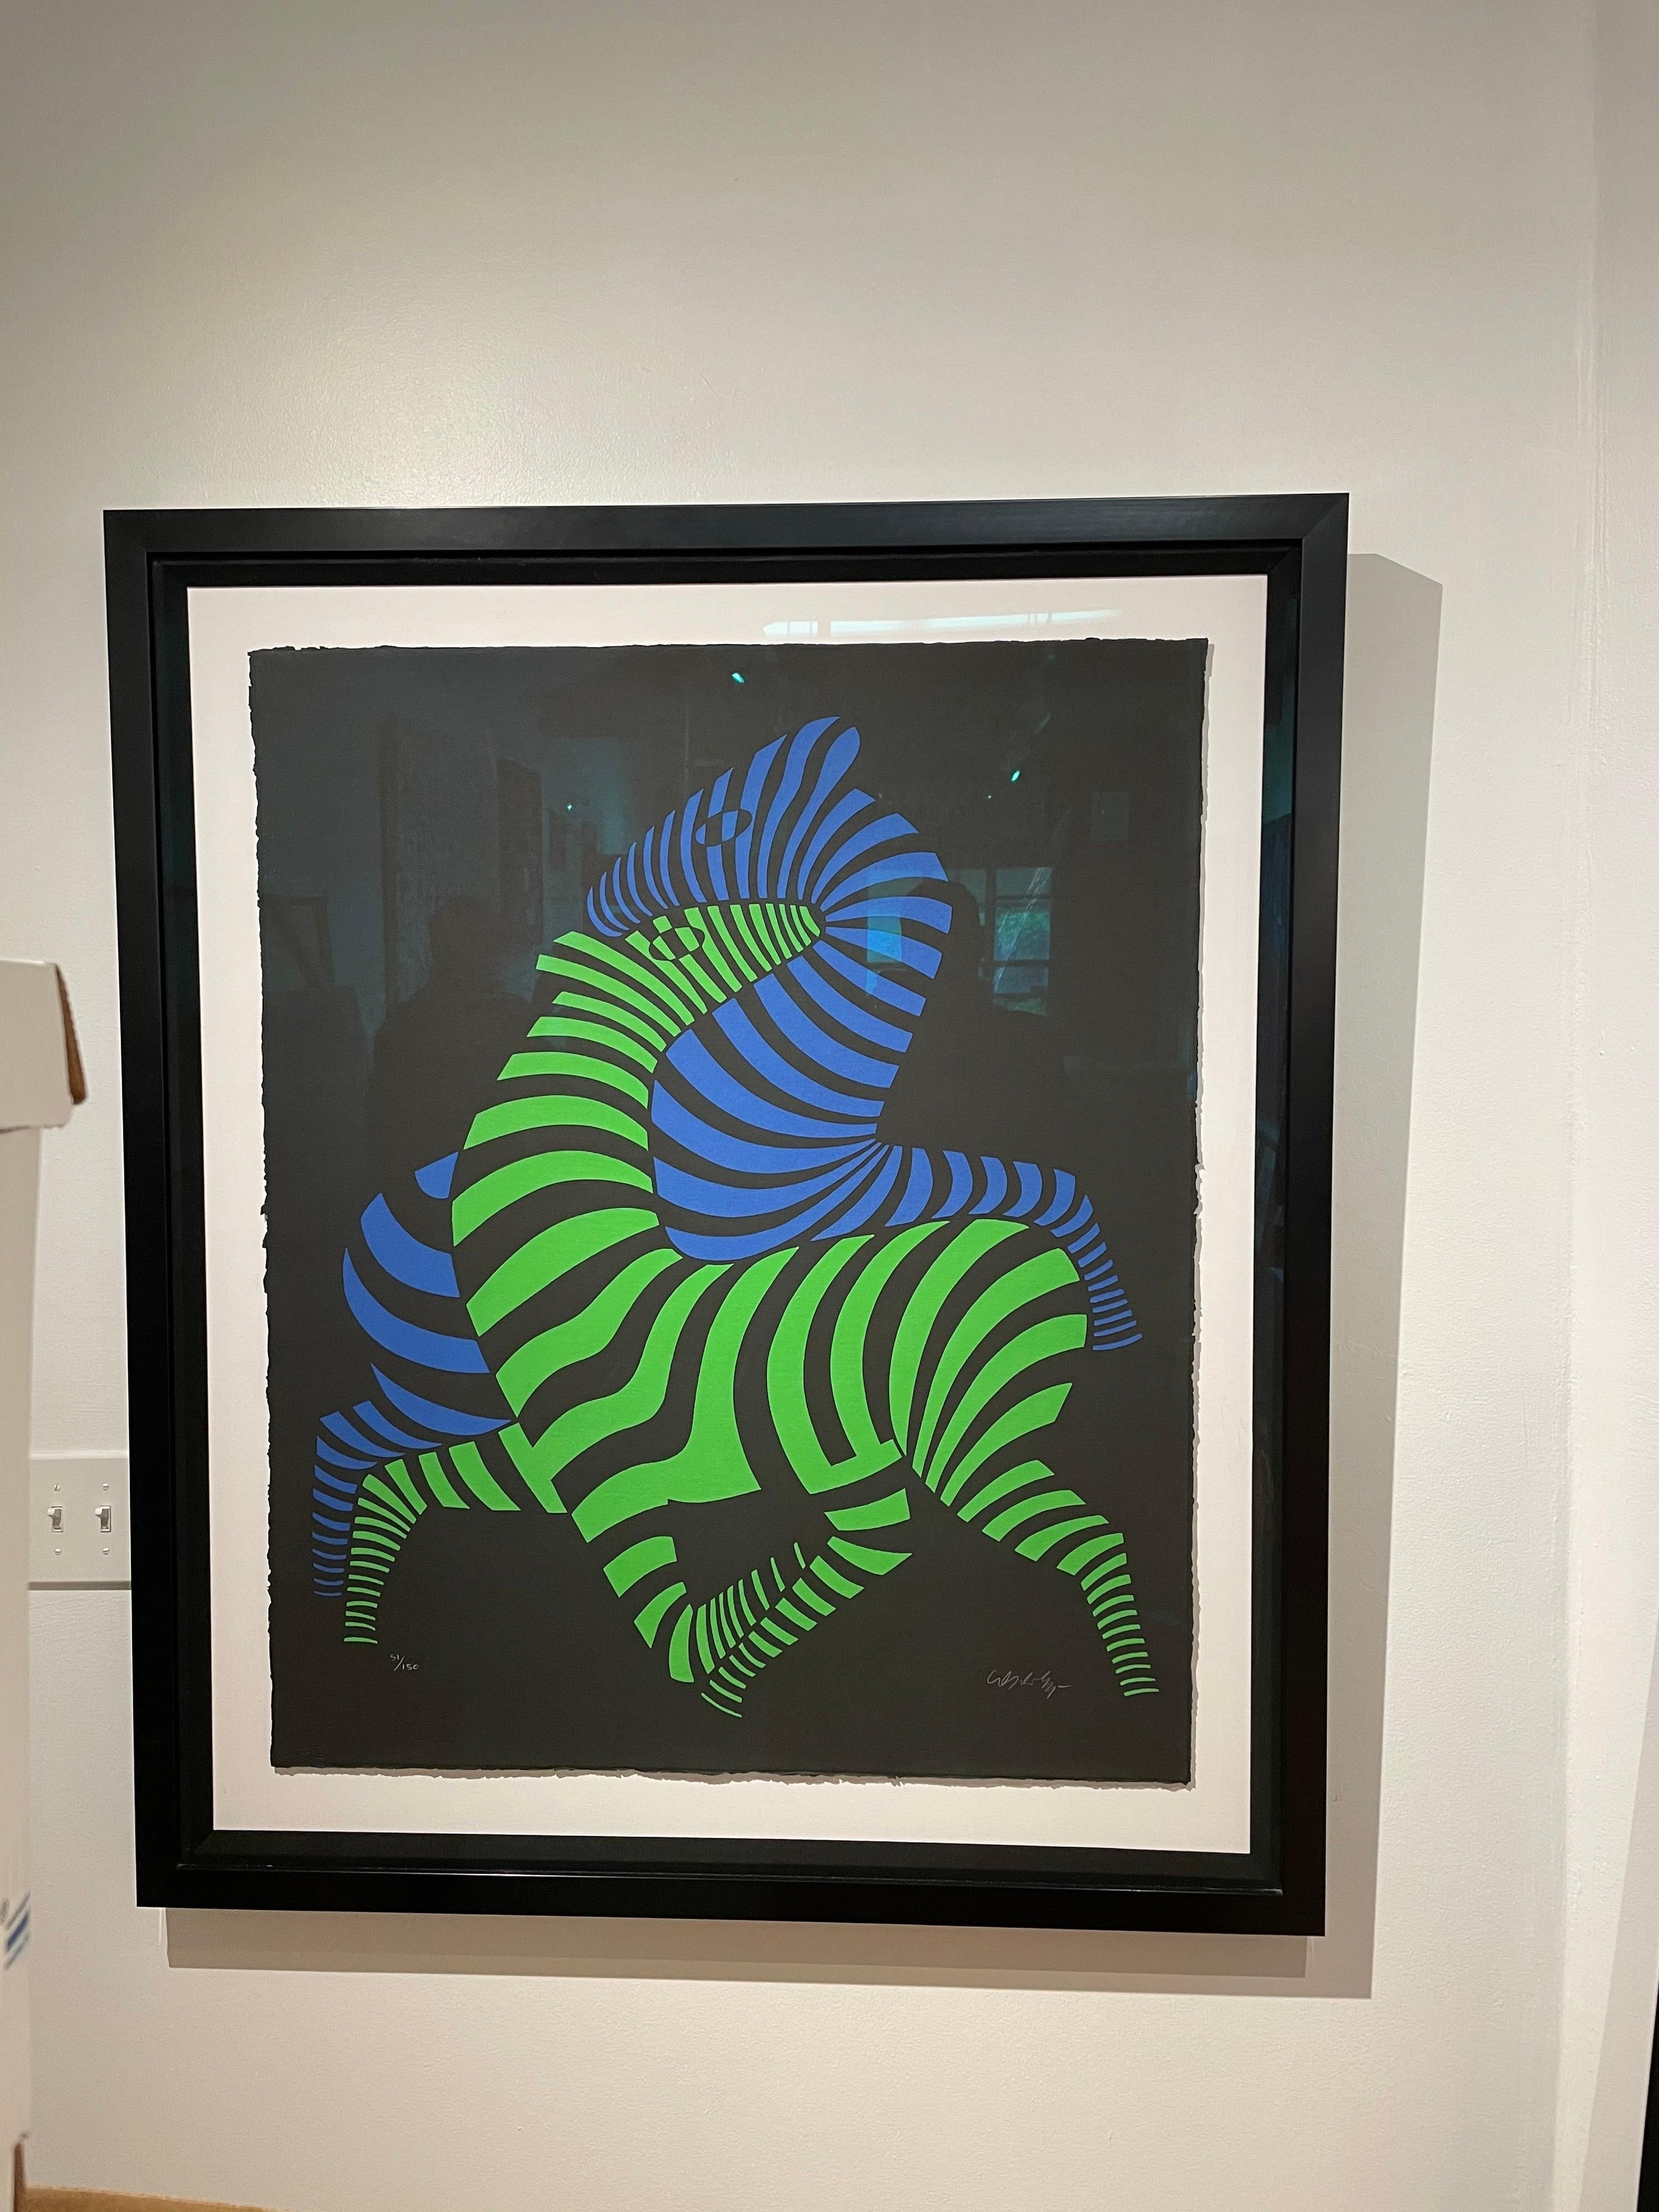 Striking beautifully freshly framed xlarge Victor Vasarely Serigraph signed and numbered great condition, rare part of the Zebras Series. 51/150.